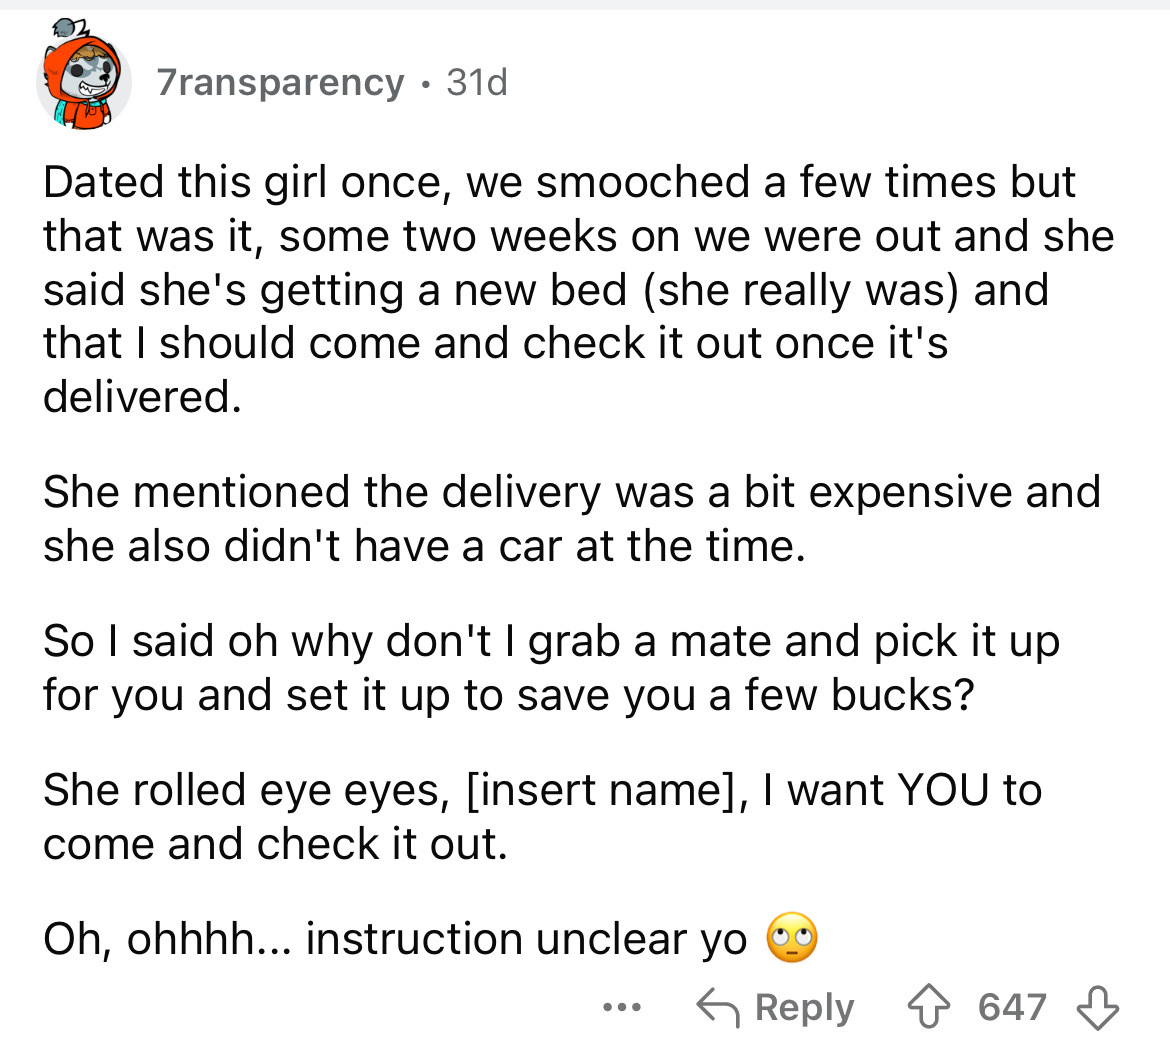 screenshot - 7ransparency 31d Dated this girl once, we smooched a few times but that was it, some two weeks on we were out and she said she's getting a new bed she really was and that I should come and check it out once it's delivered. She mentioned the d